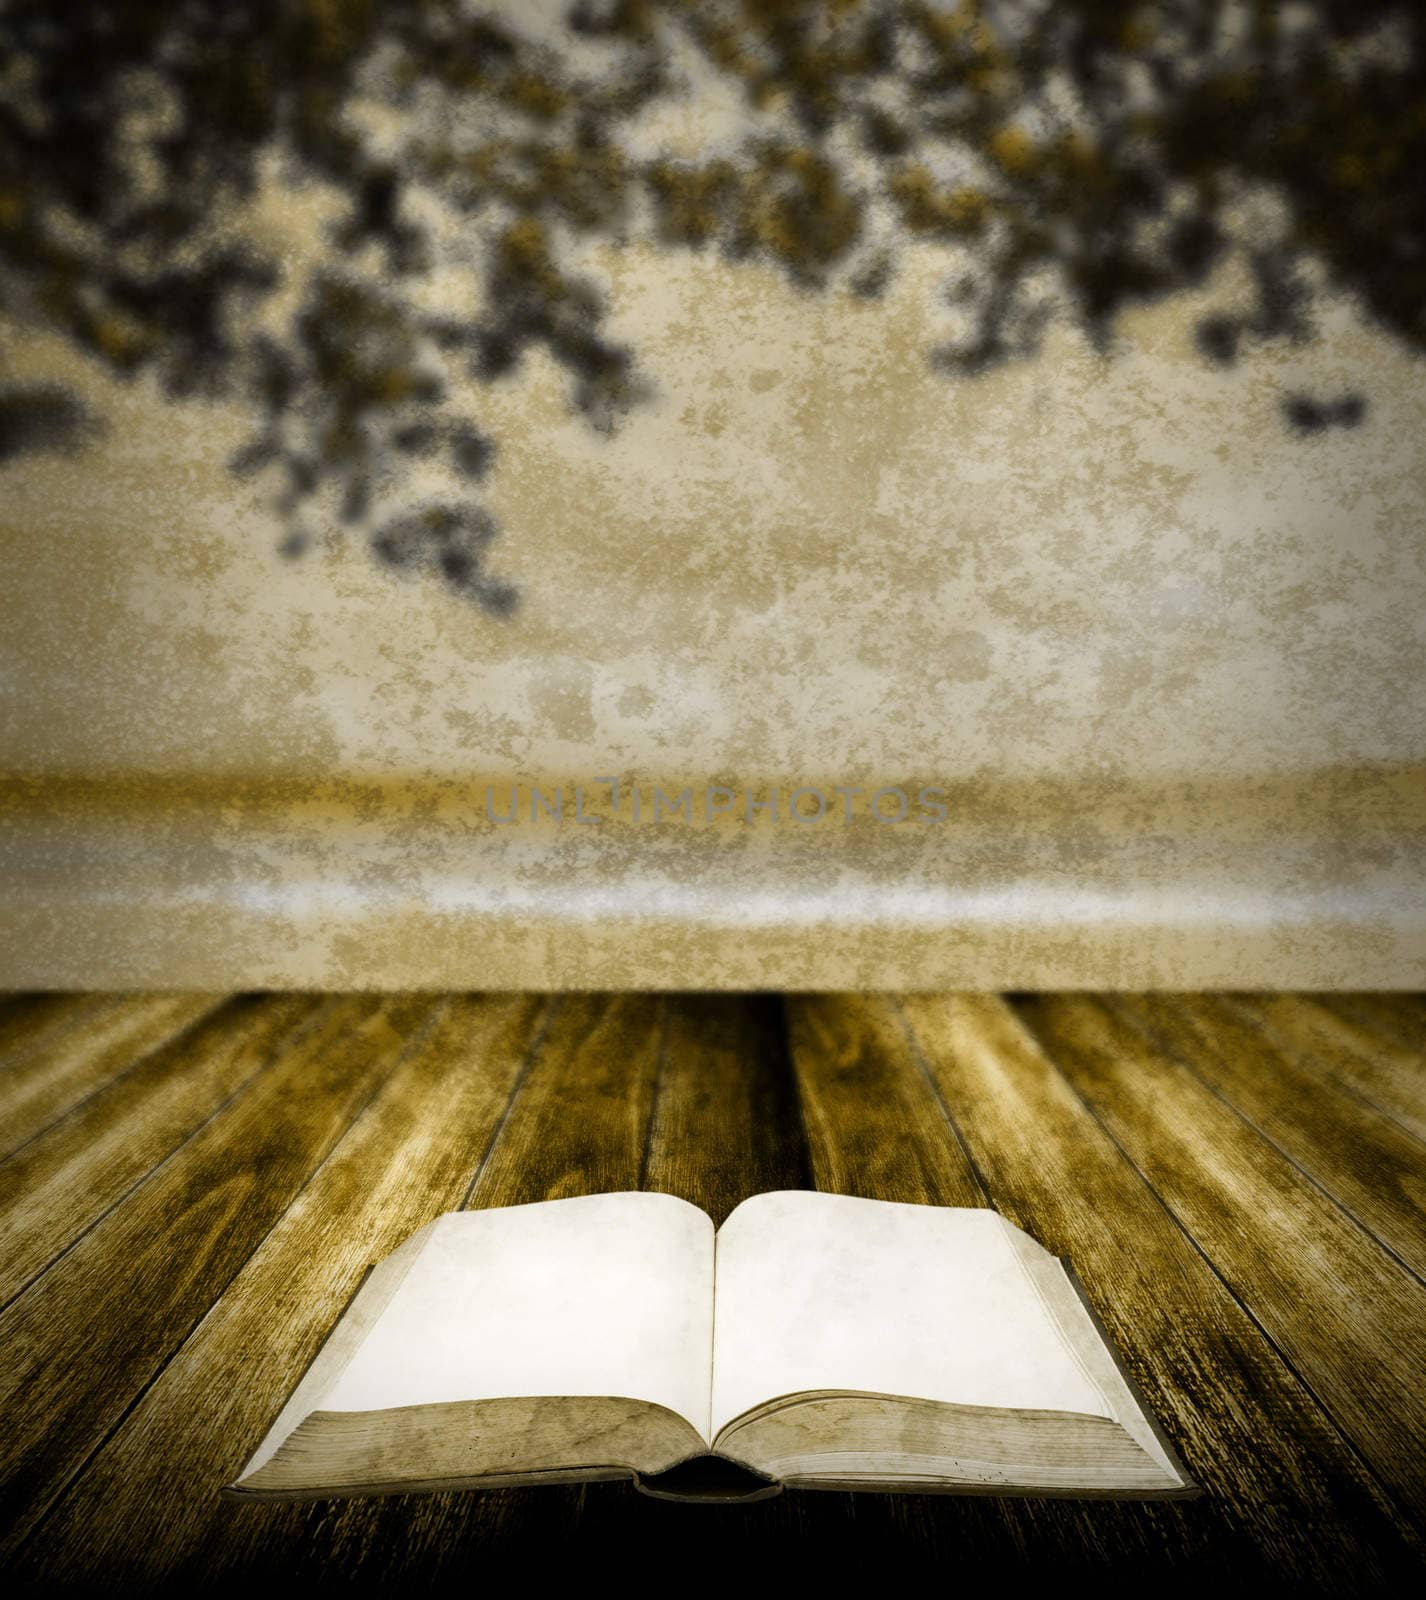 Read book on wooden table in retro style, Nostalgia concept by pixbox77